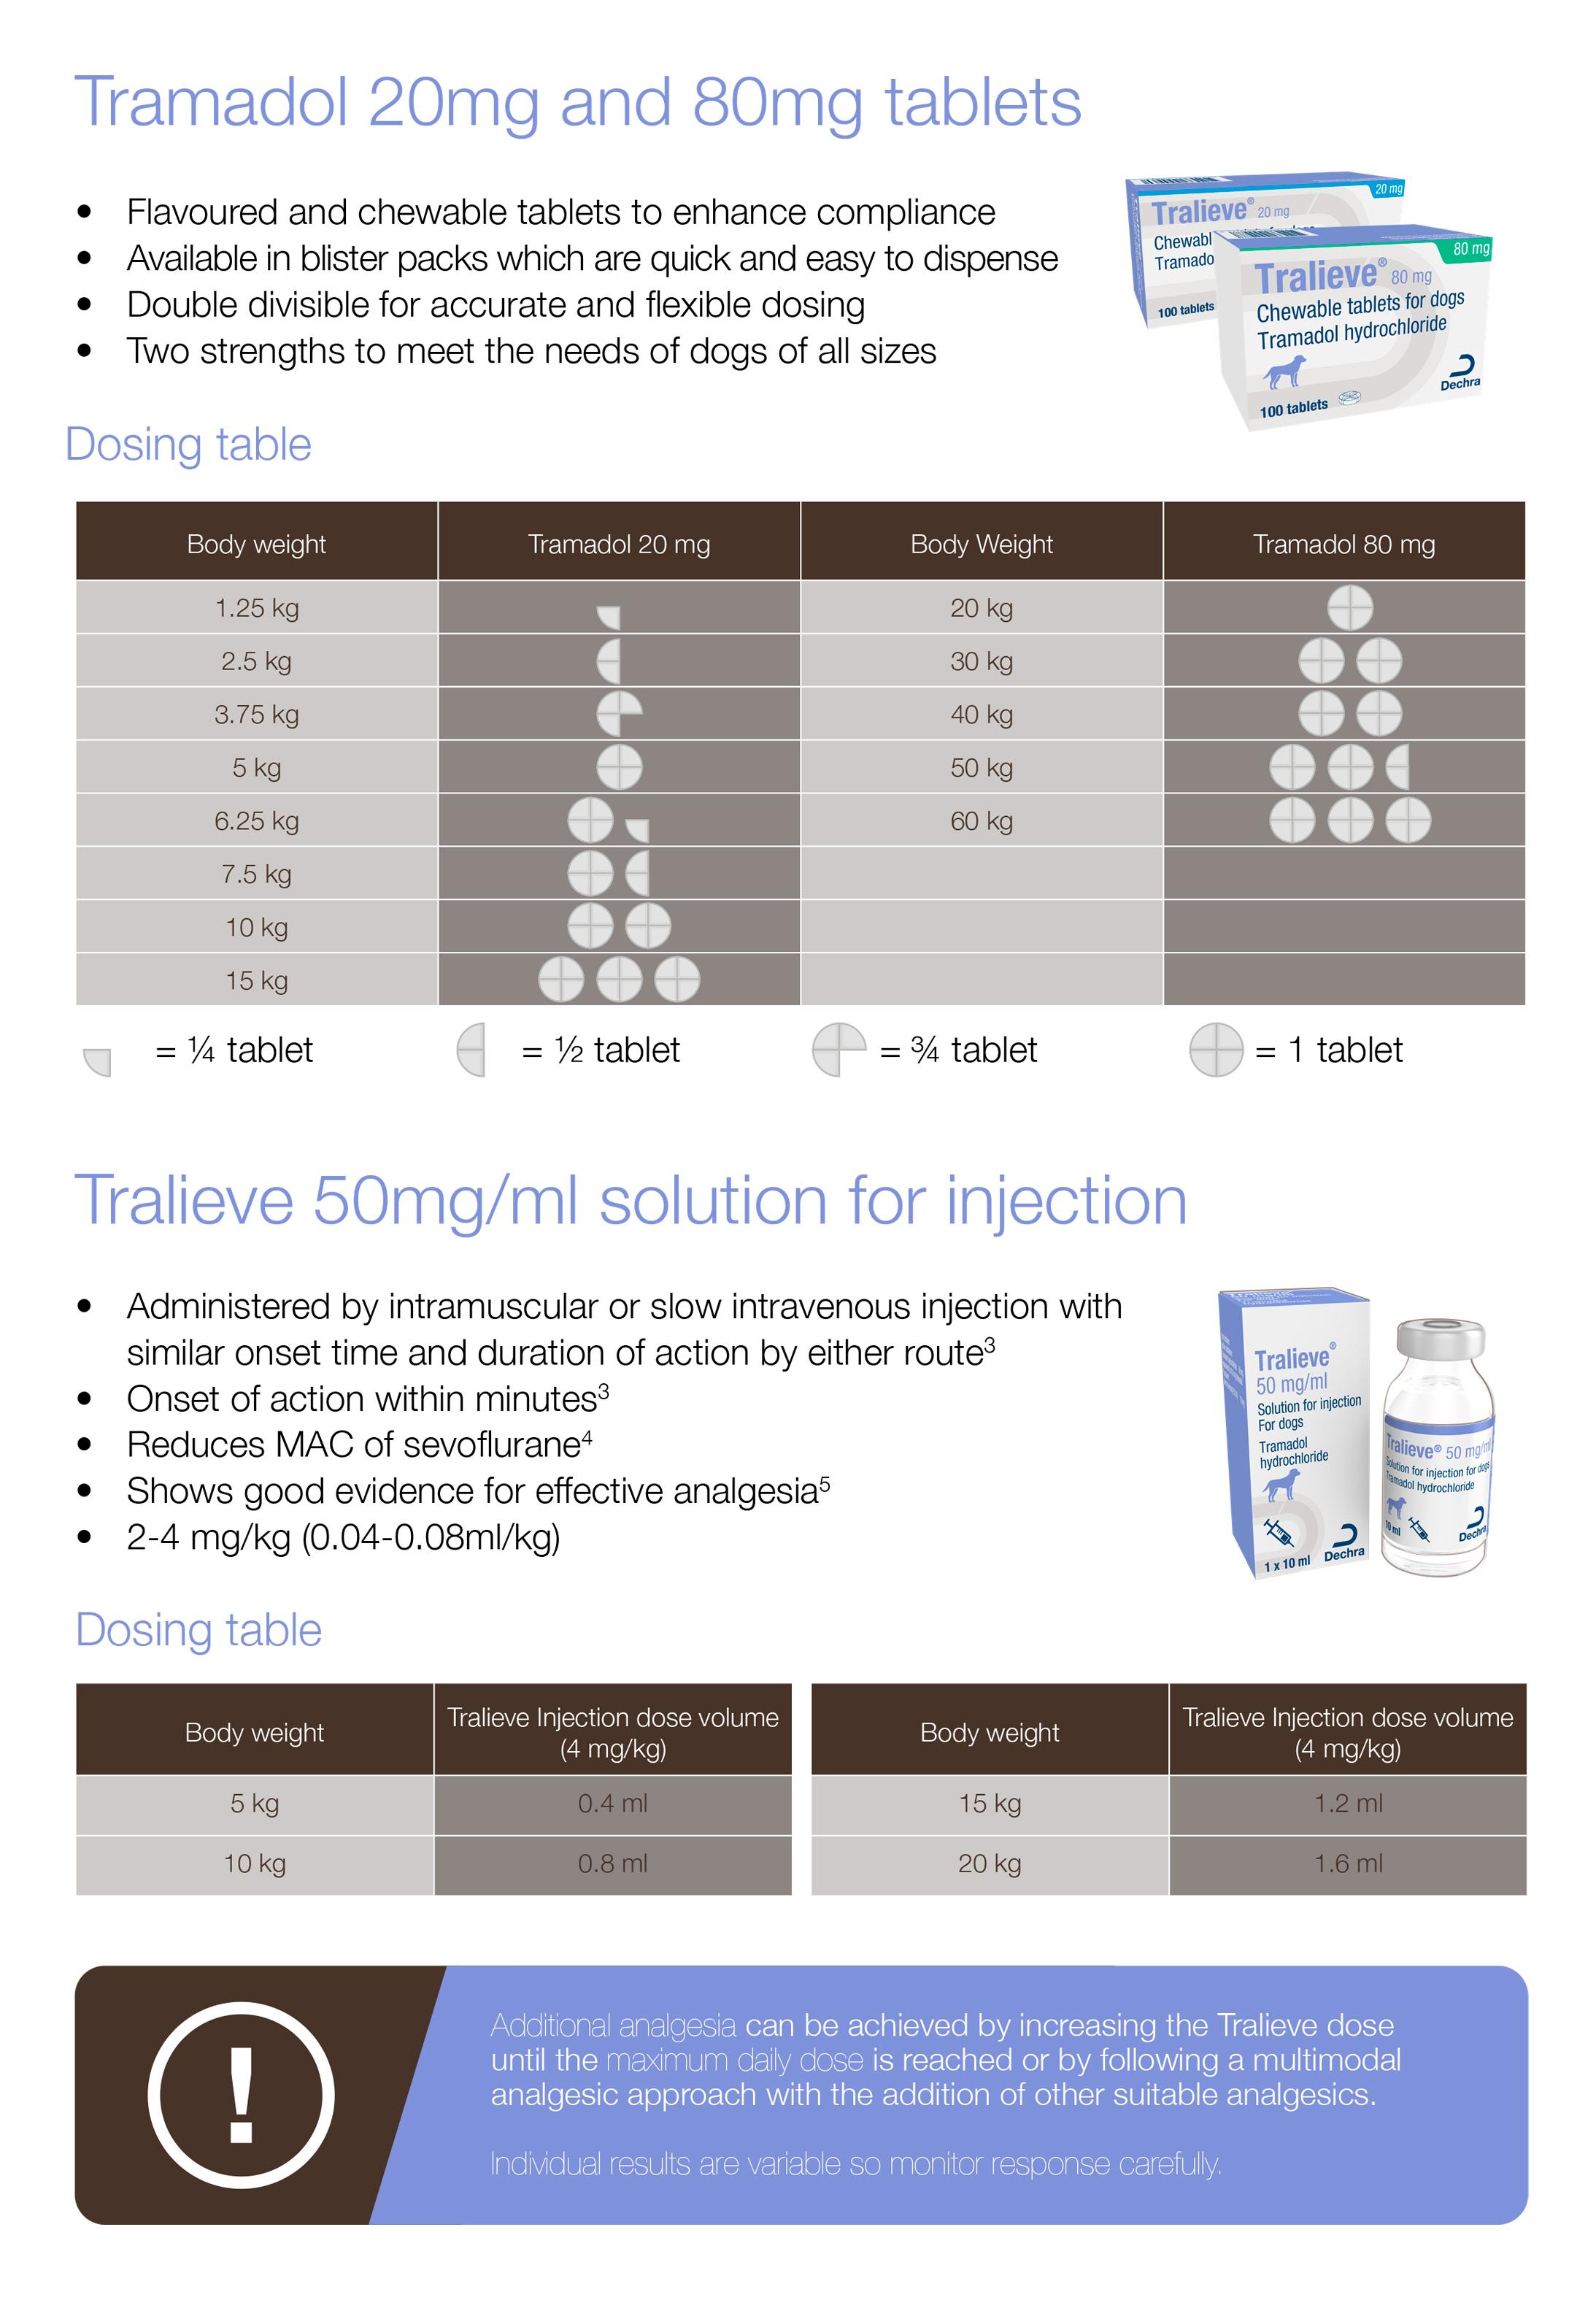 Tralieve Dosing Table